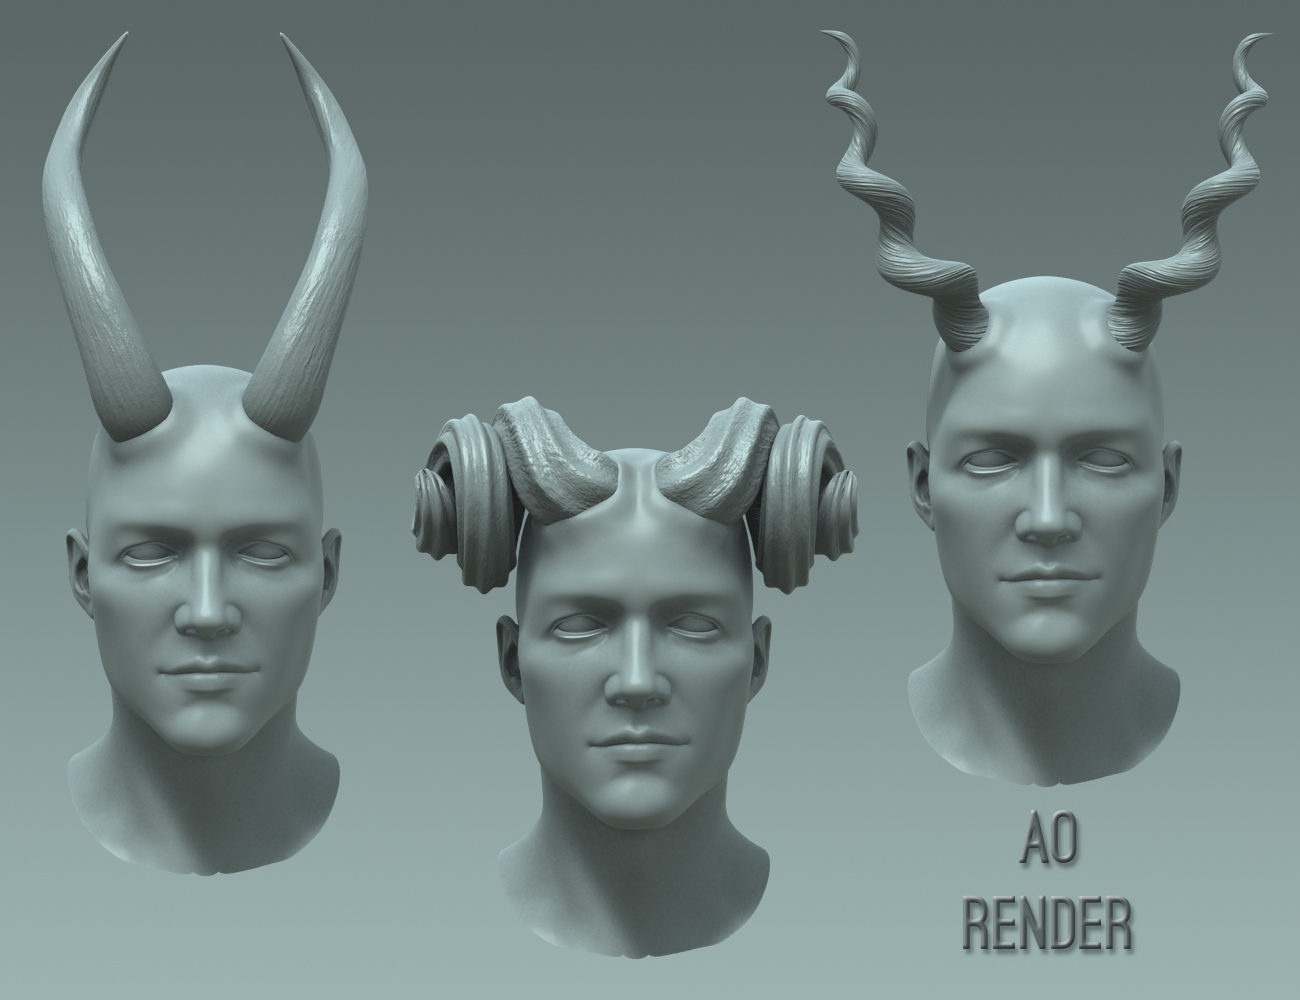 Universal Horns for Genesis 3 Male(s) by: midnight_stories, 3D Models by Daz 3D